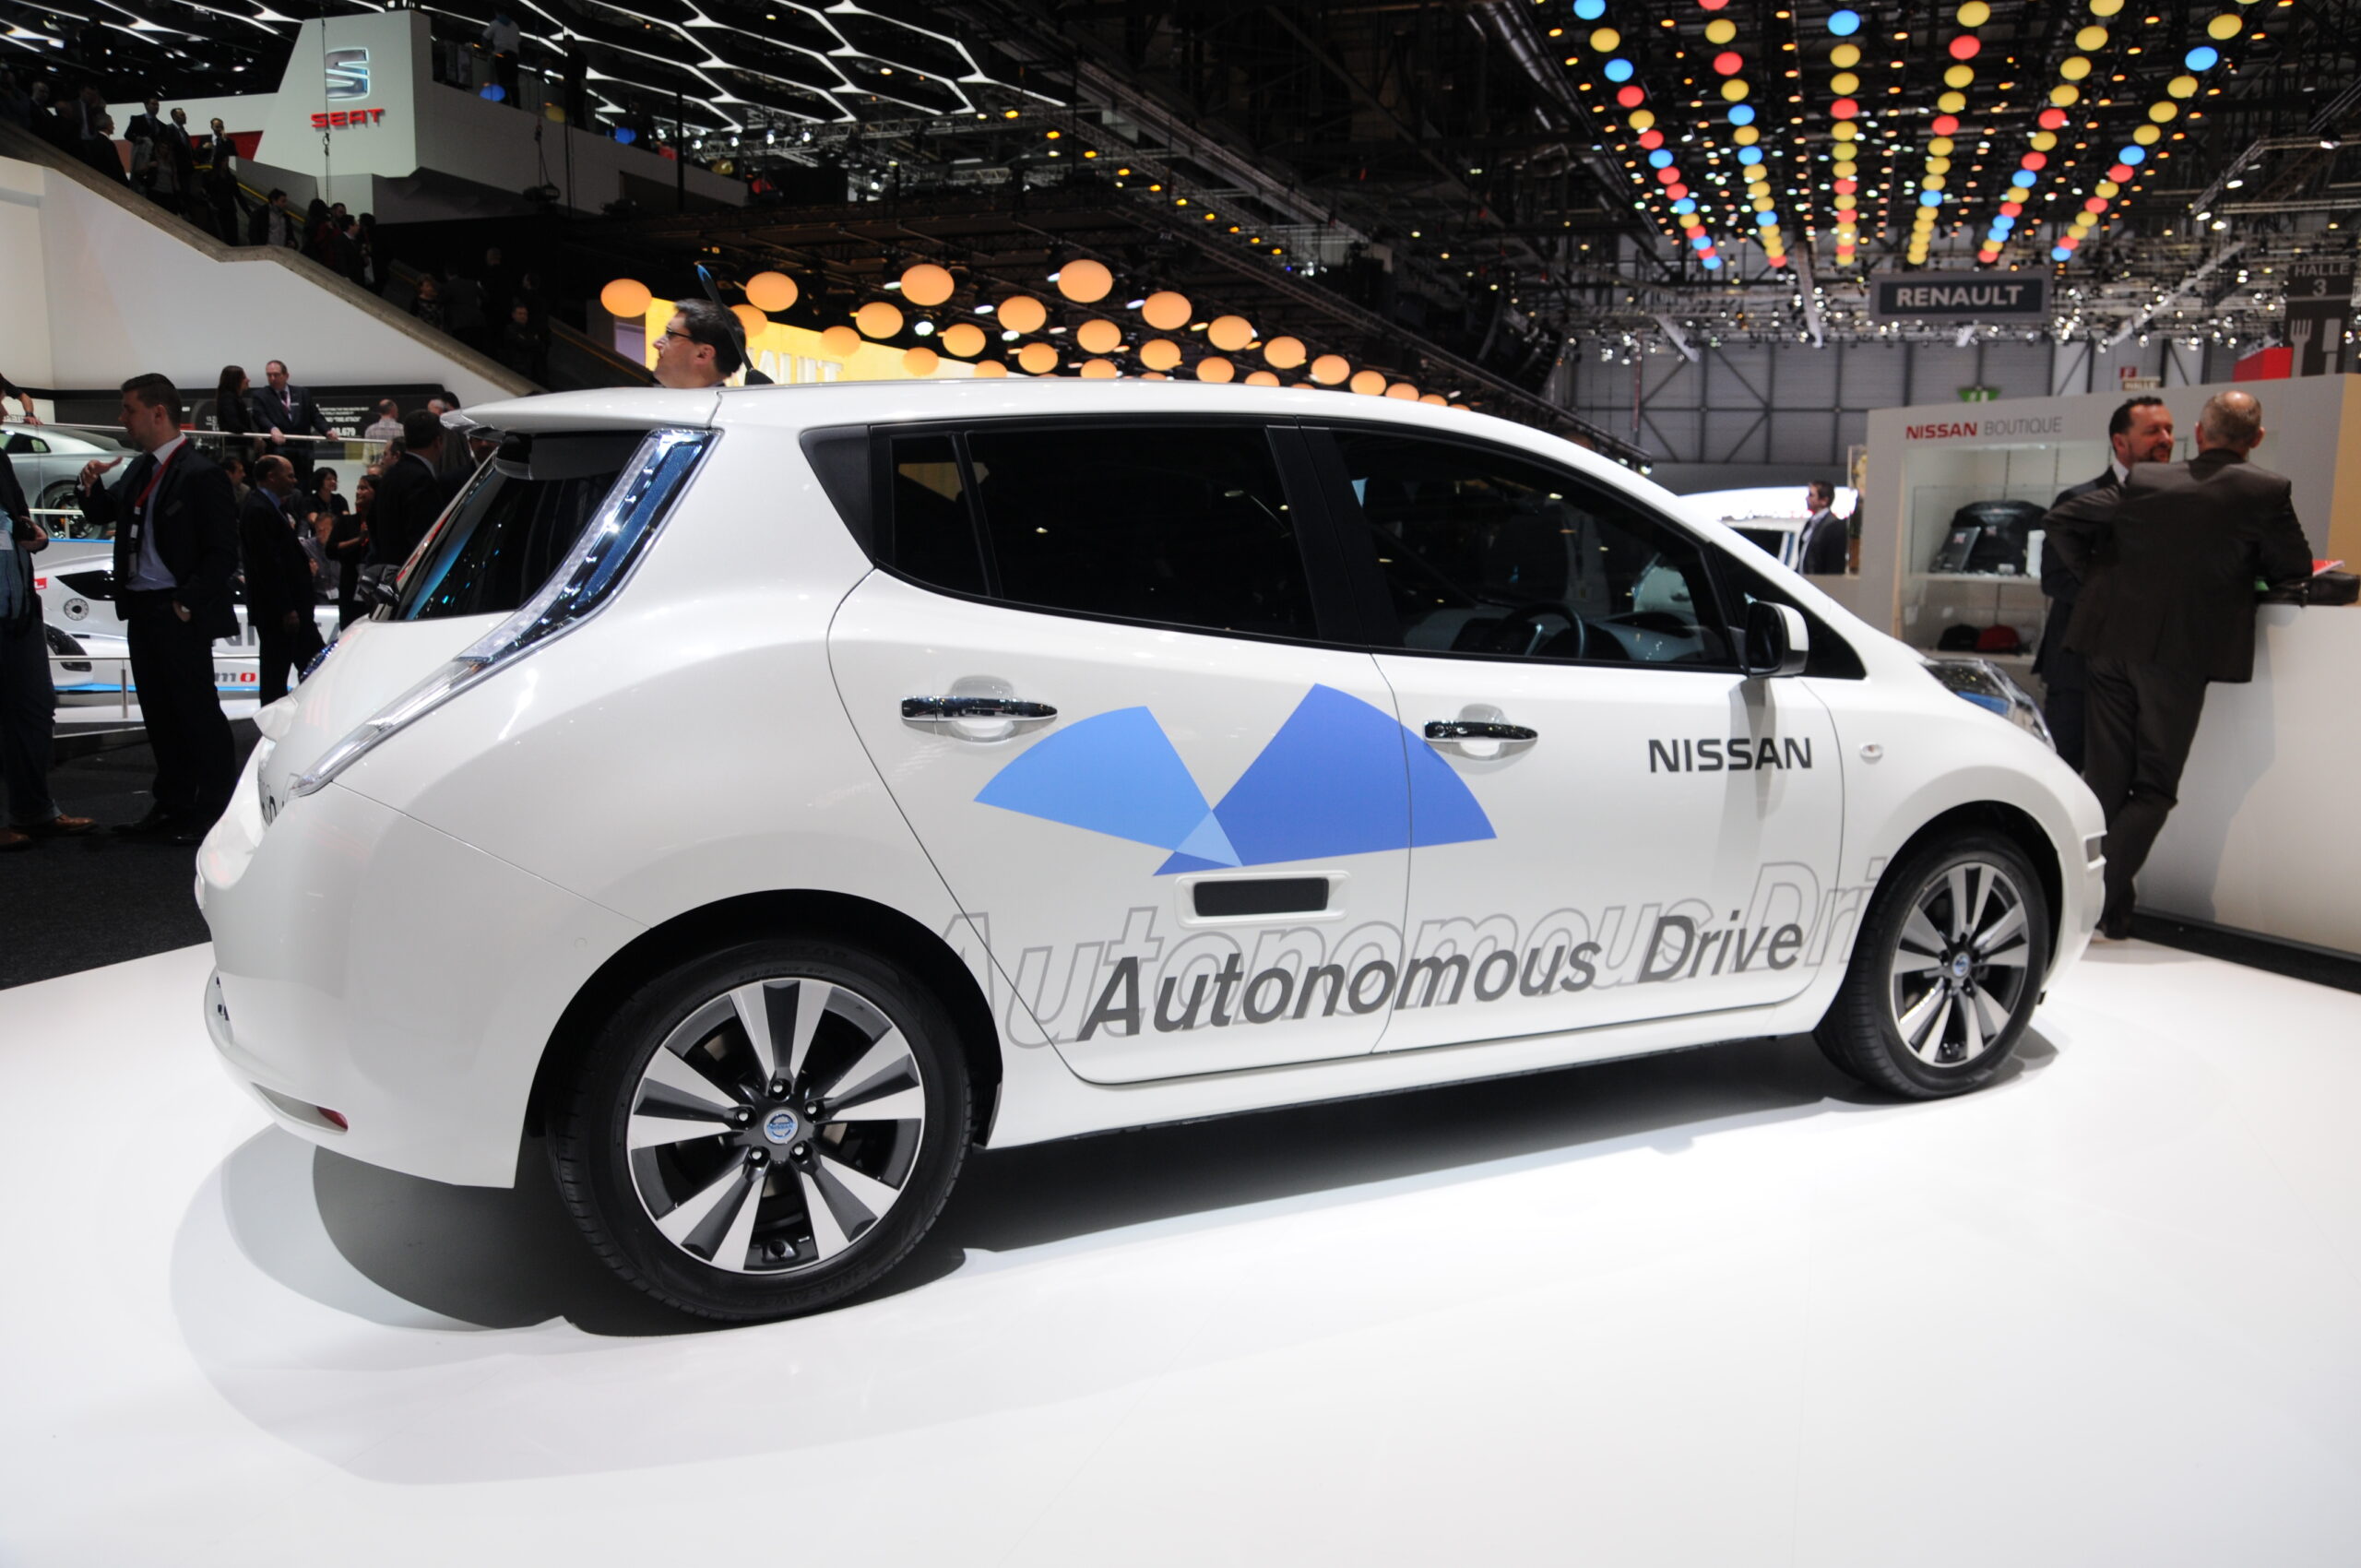 A white car, with automatic drive printed on it. Driverless car.